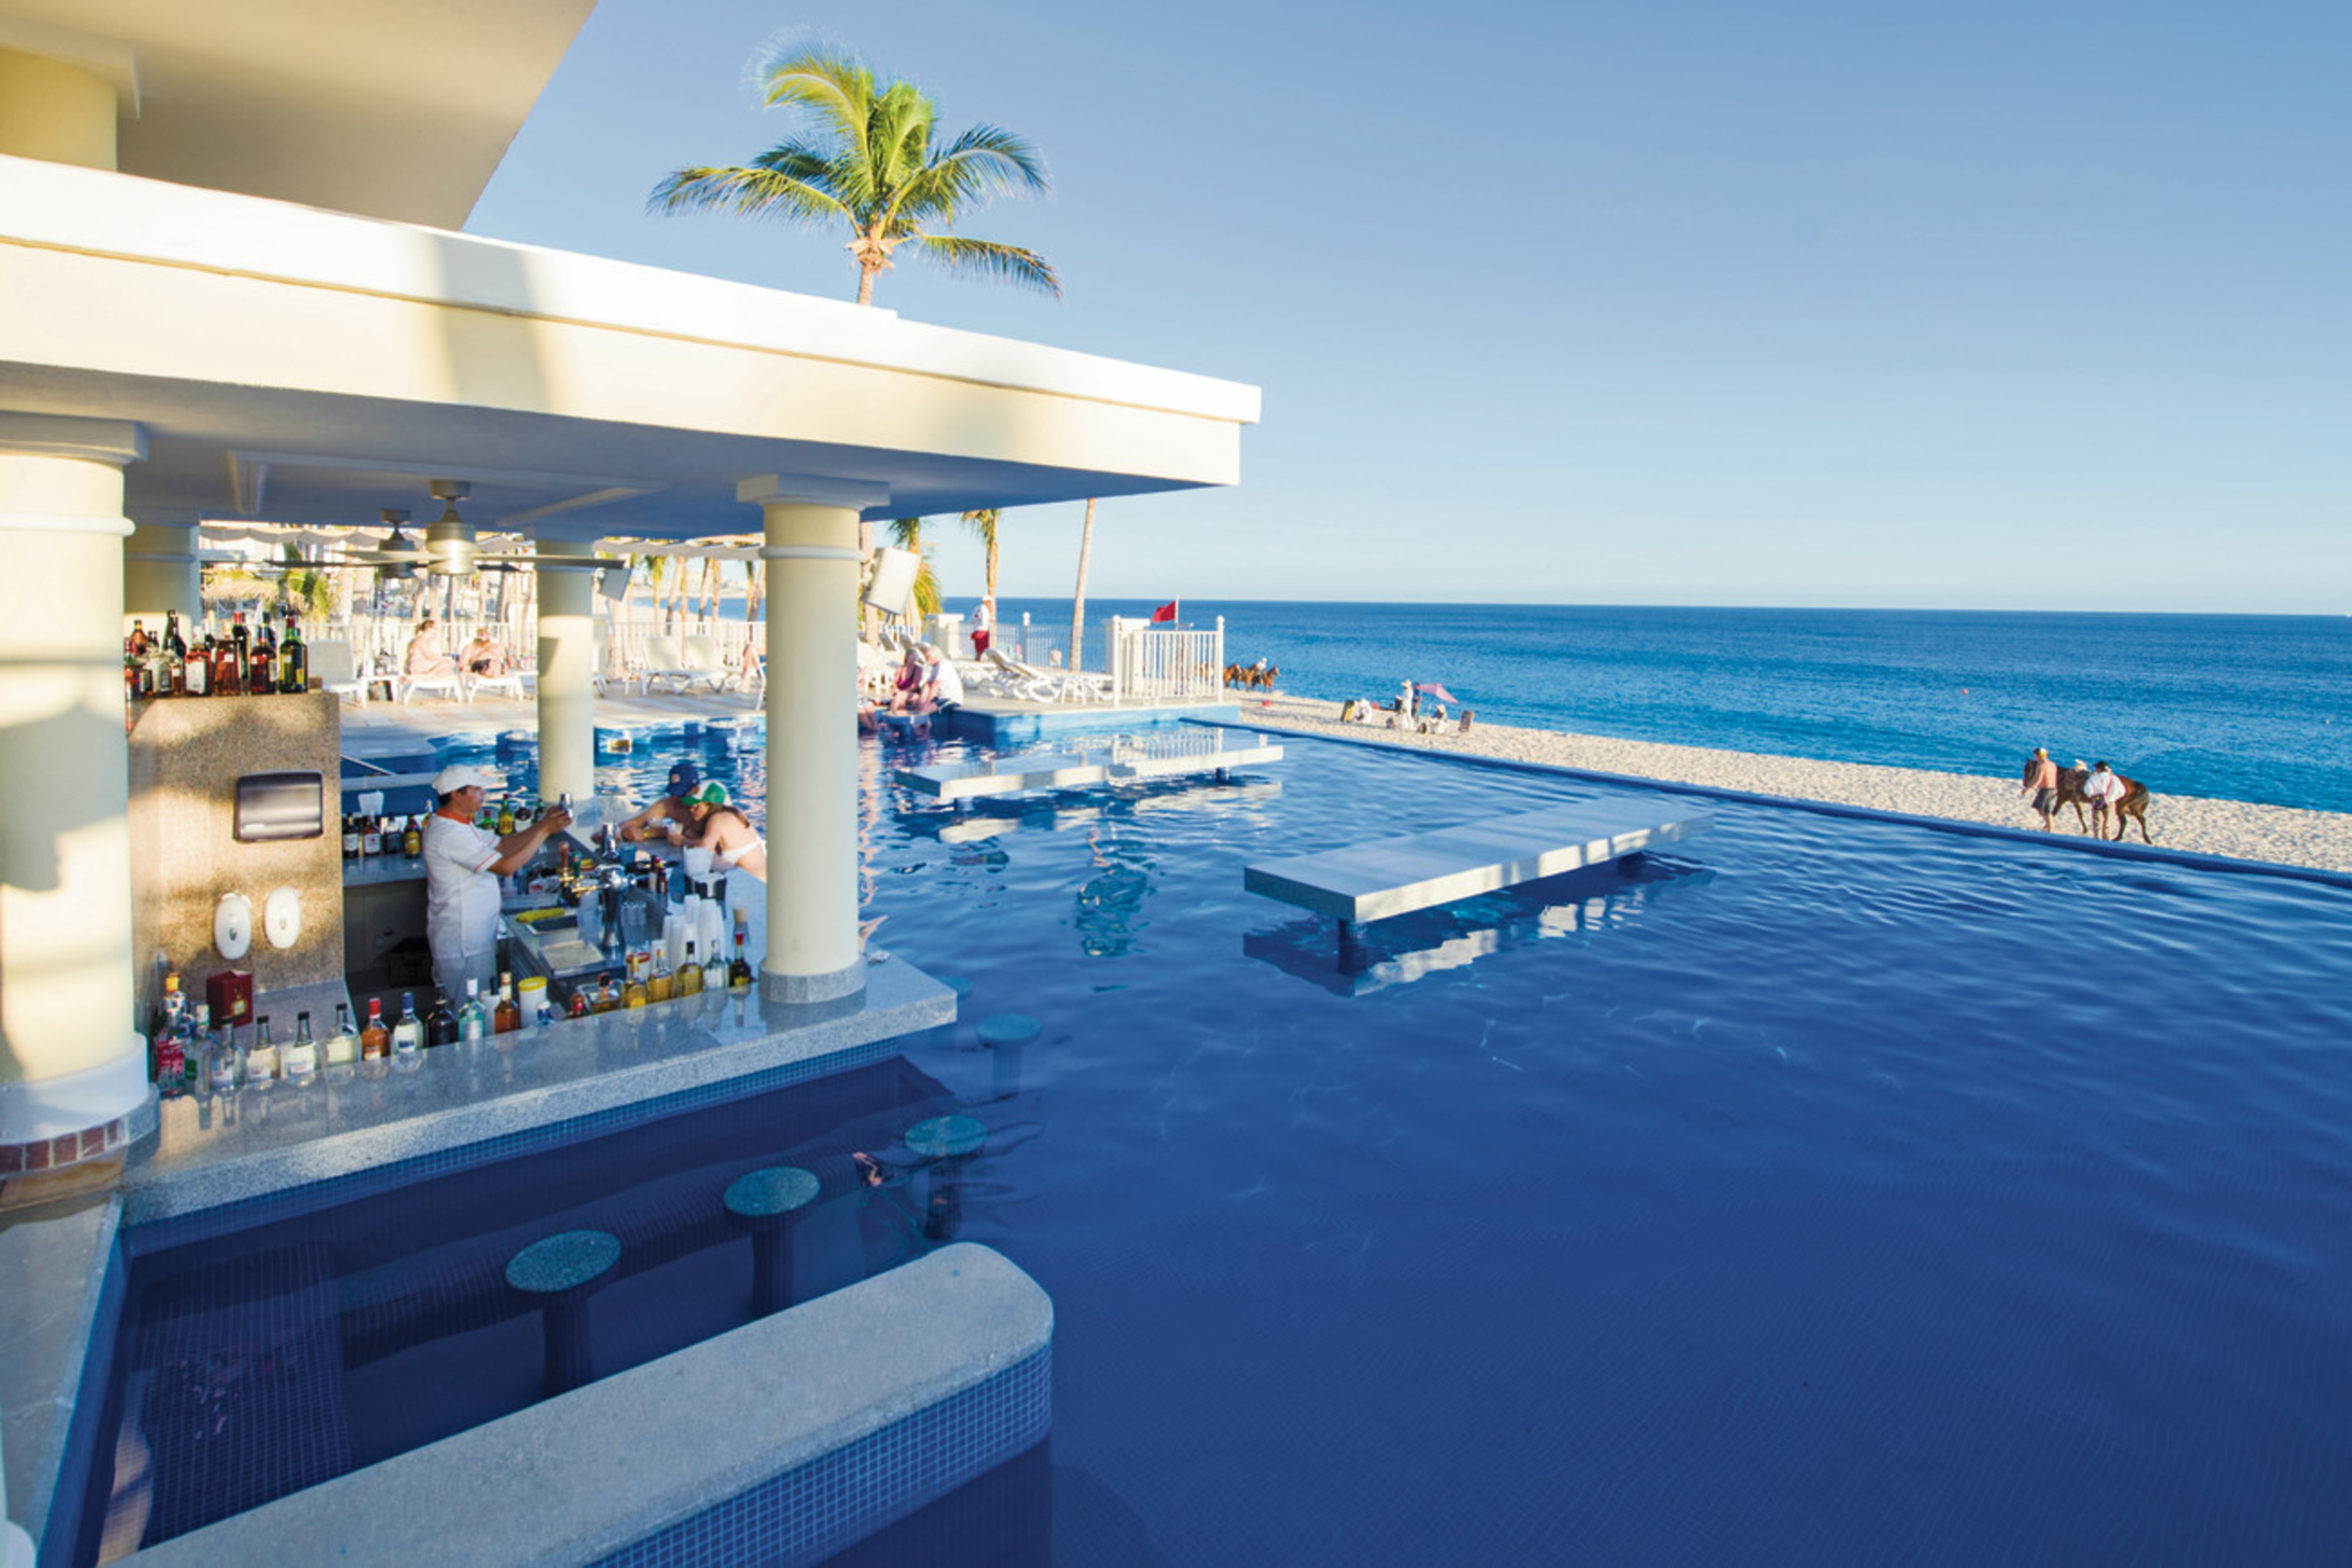 Have you heard about everything on offer at the Riu Palace